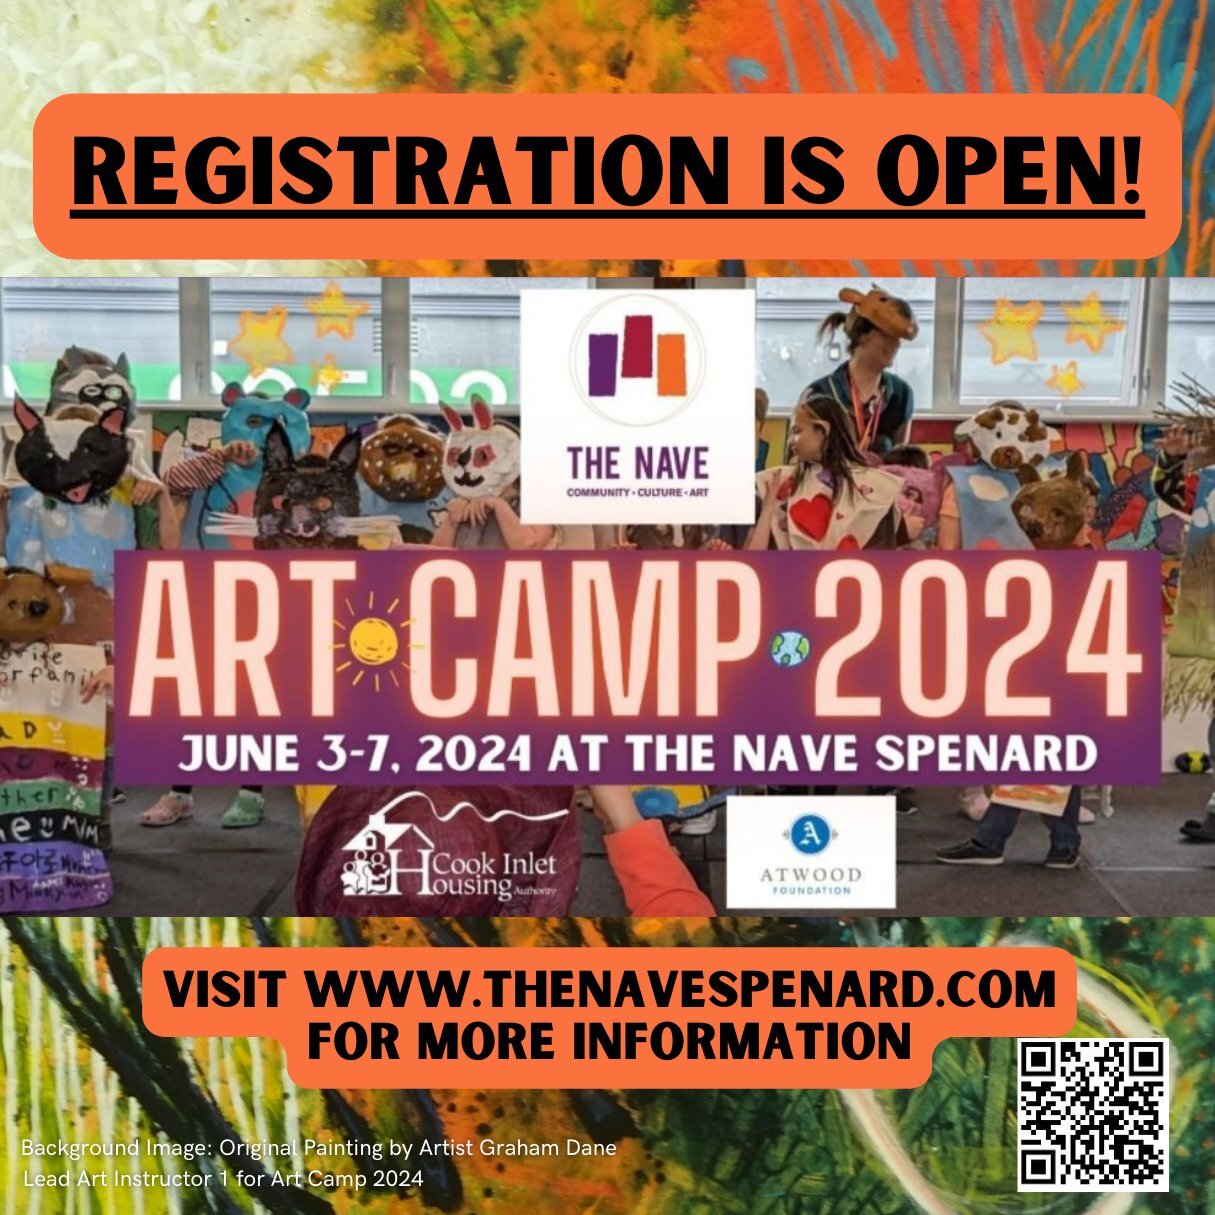 This is not a drill: ART CAMP 2024 REGISTRATION IS NOW OPEN!❤🎨

June 3-7, 2024: Local, professional artists Graham Dane and Candace Blas will lead campers ages 7-11 through art projects including (but not limited to) wearable art; painting; sketchin